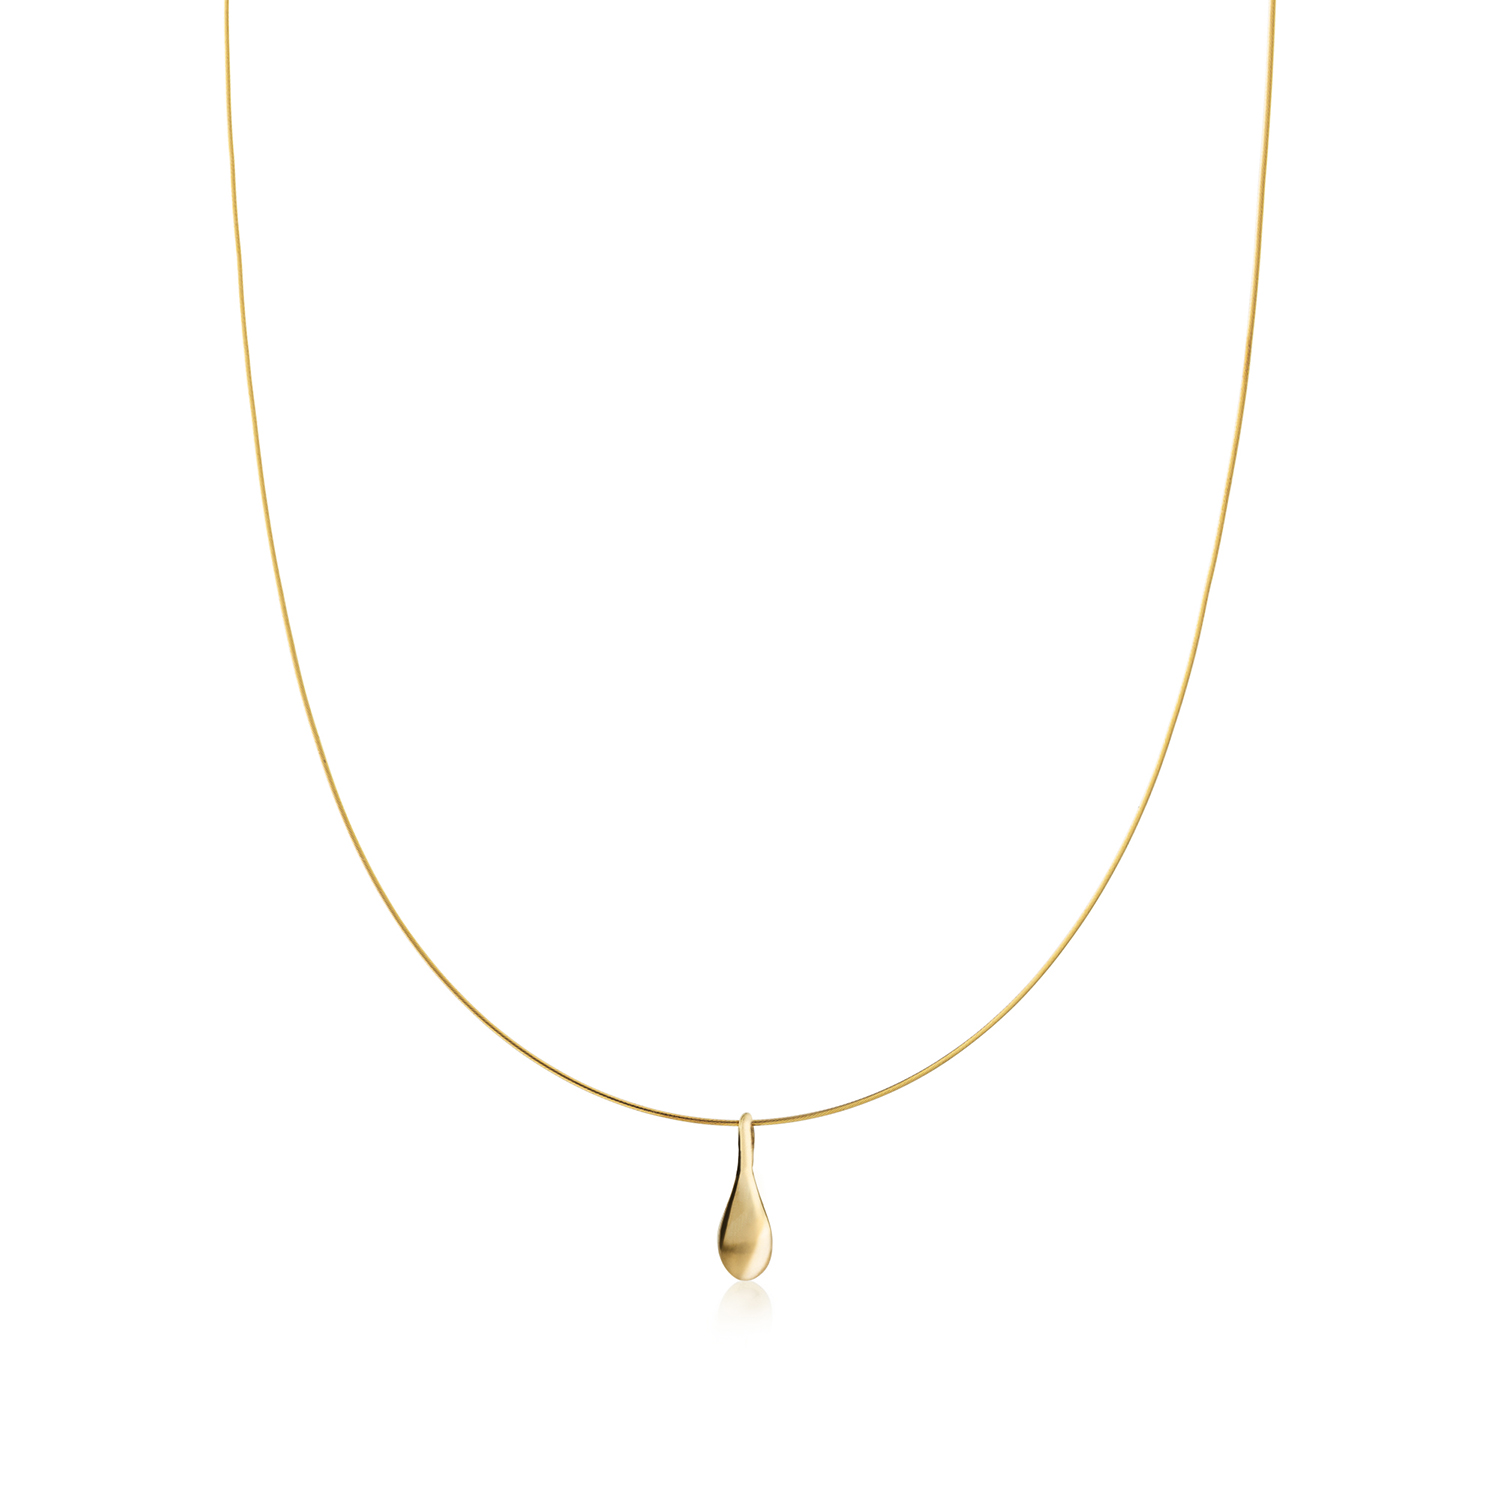 Olive oil drop pendant in 18k gold with steel chain